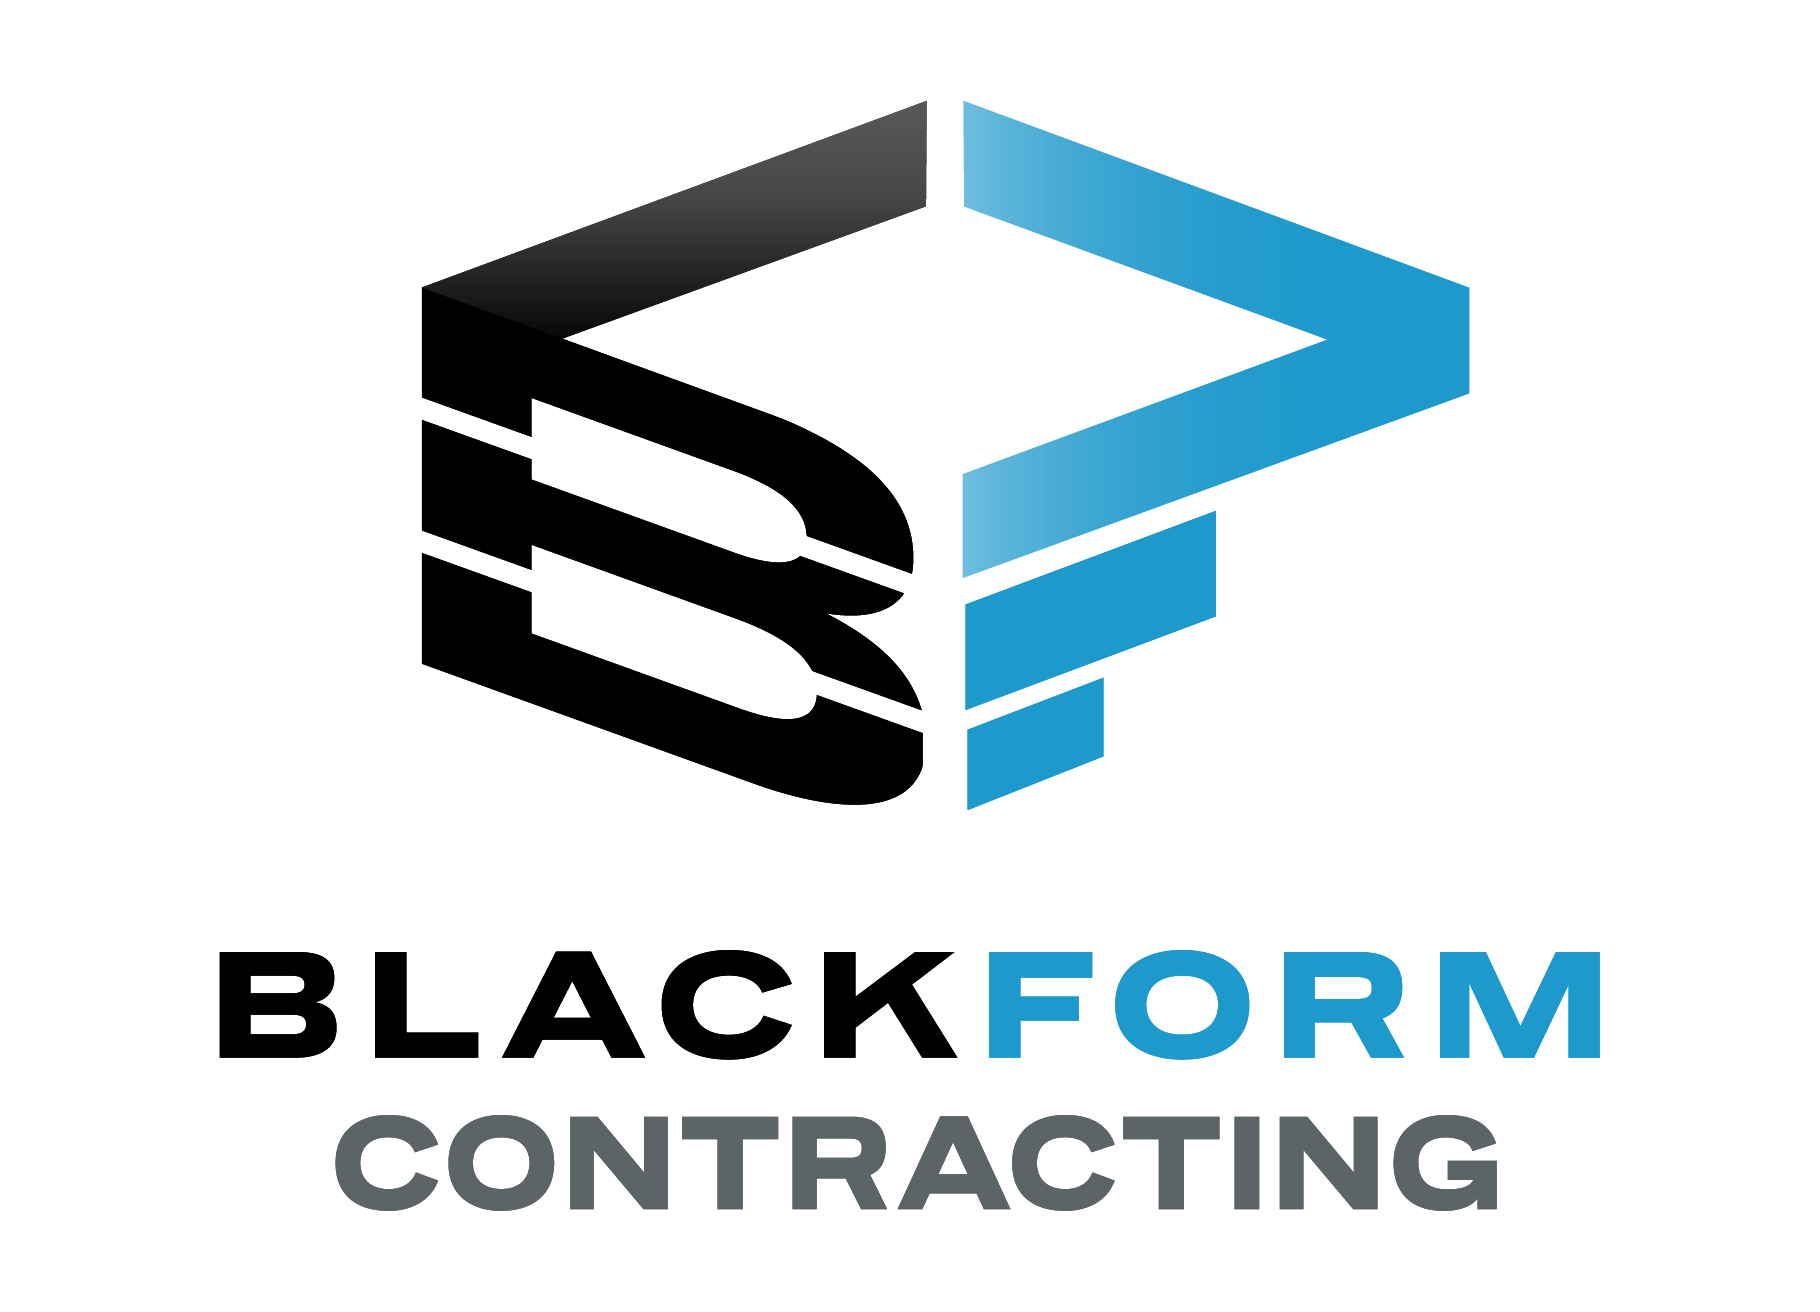 Black Form Contracting